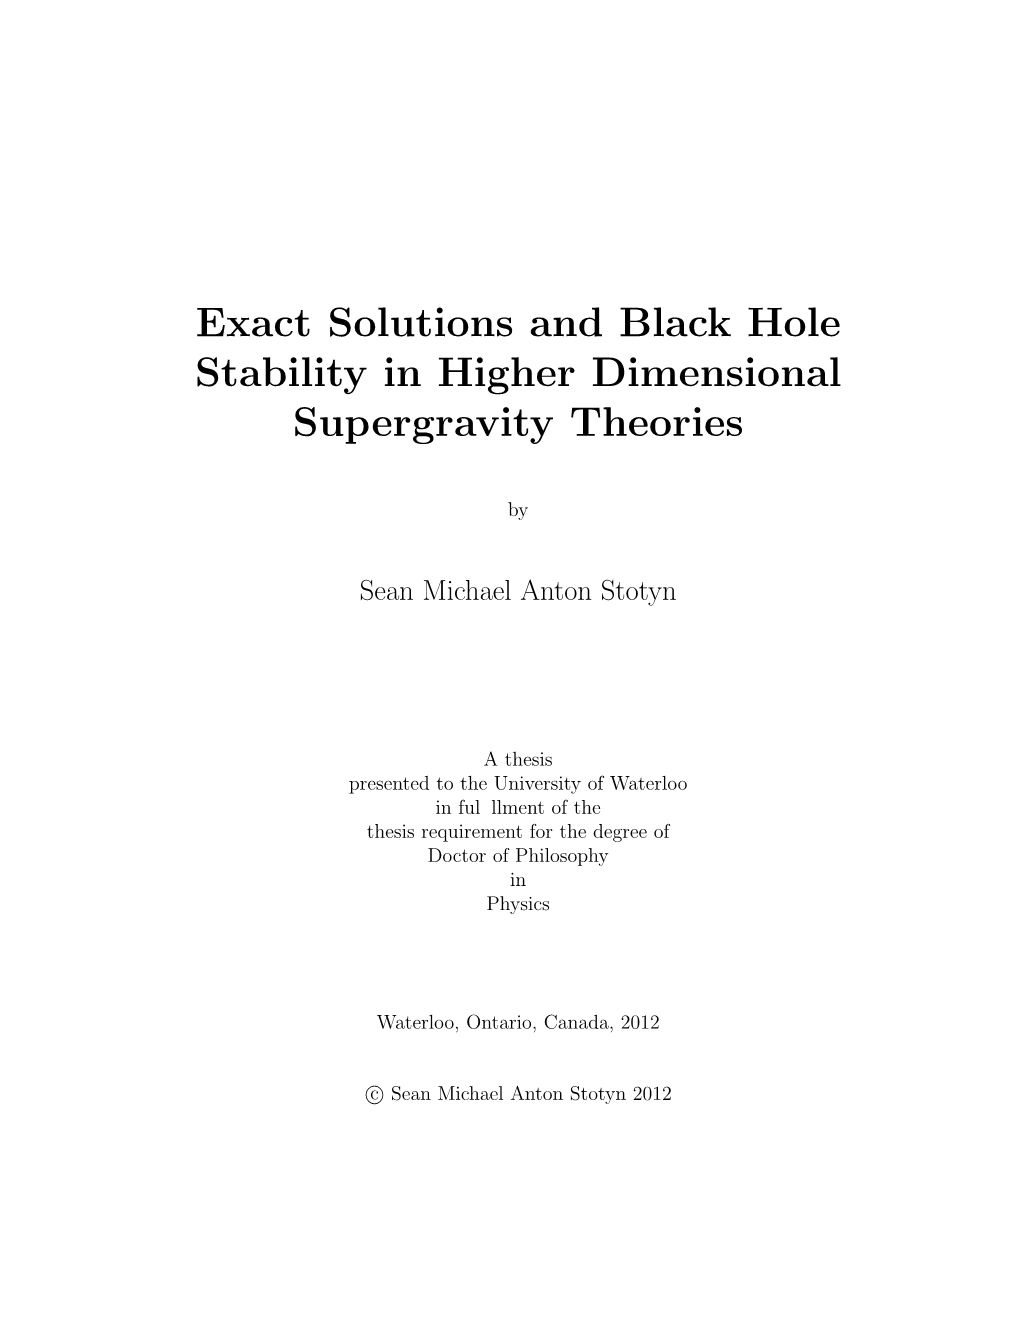 Exact Solutions and Black Hole Stability in Higher Dimensional Supergravity Theories